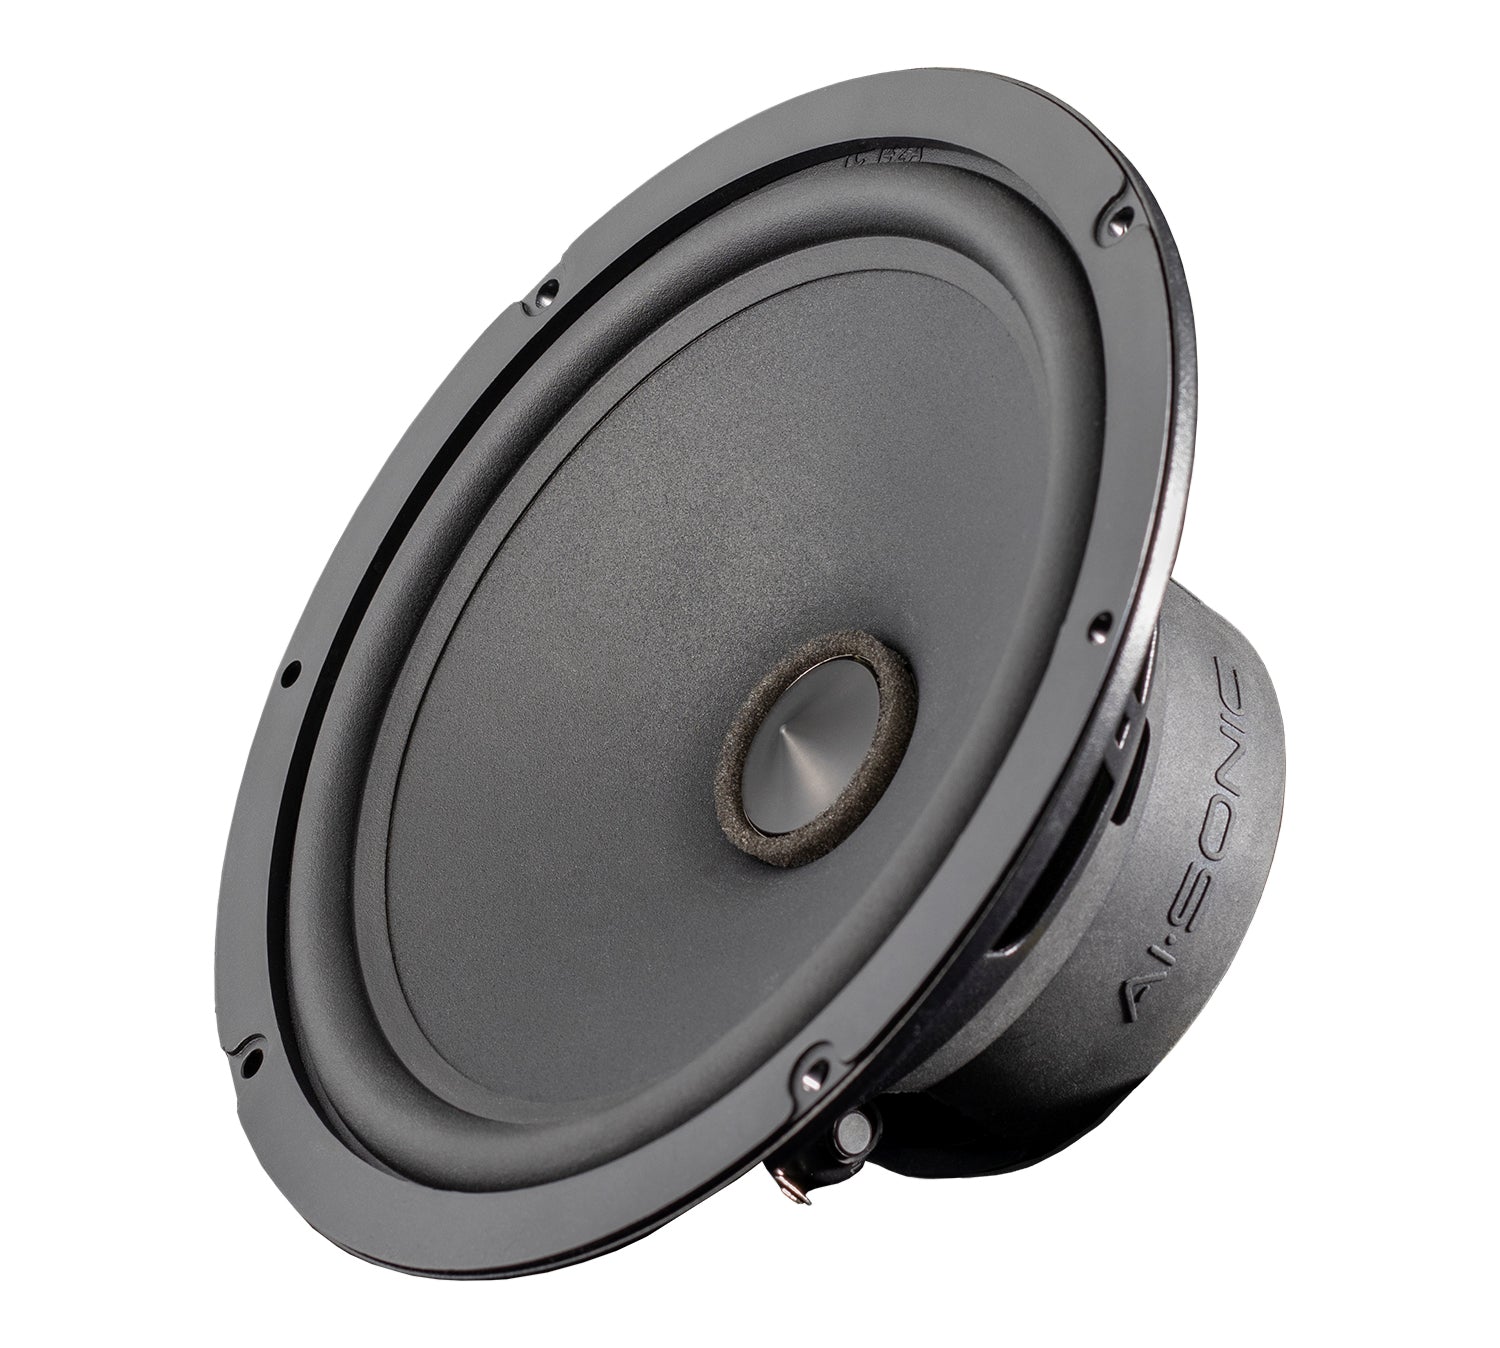 Ai-Sonic S1-MB Separate set W164 / X164